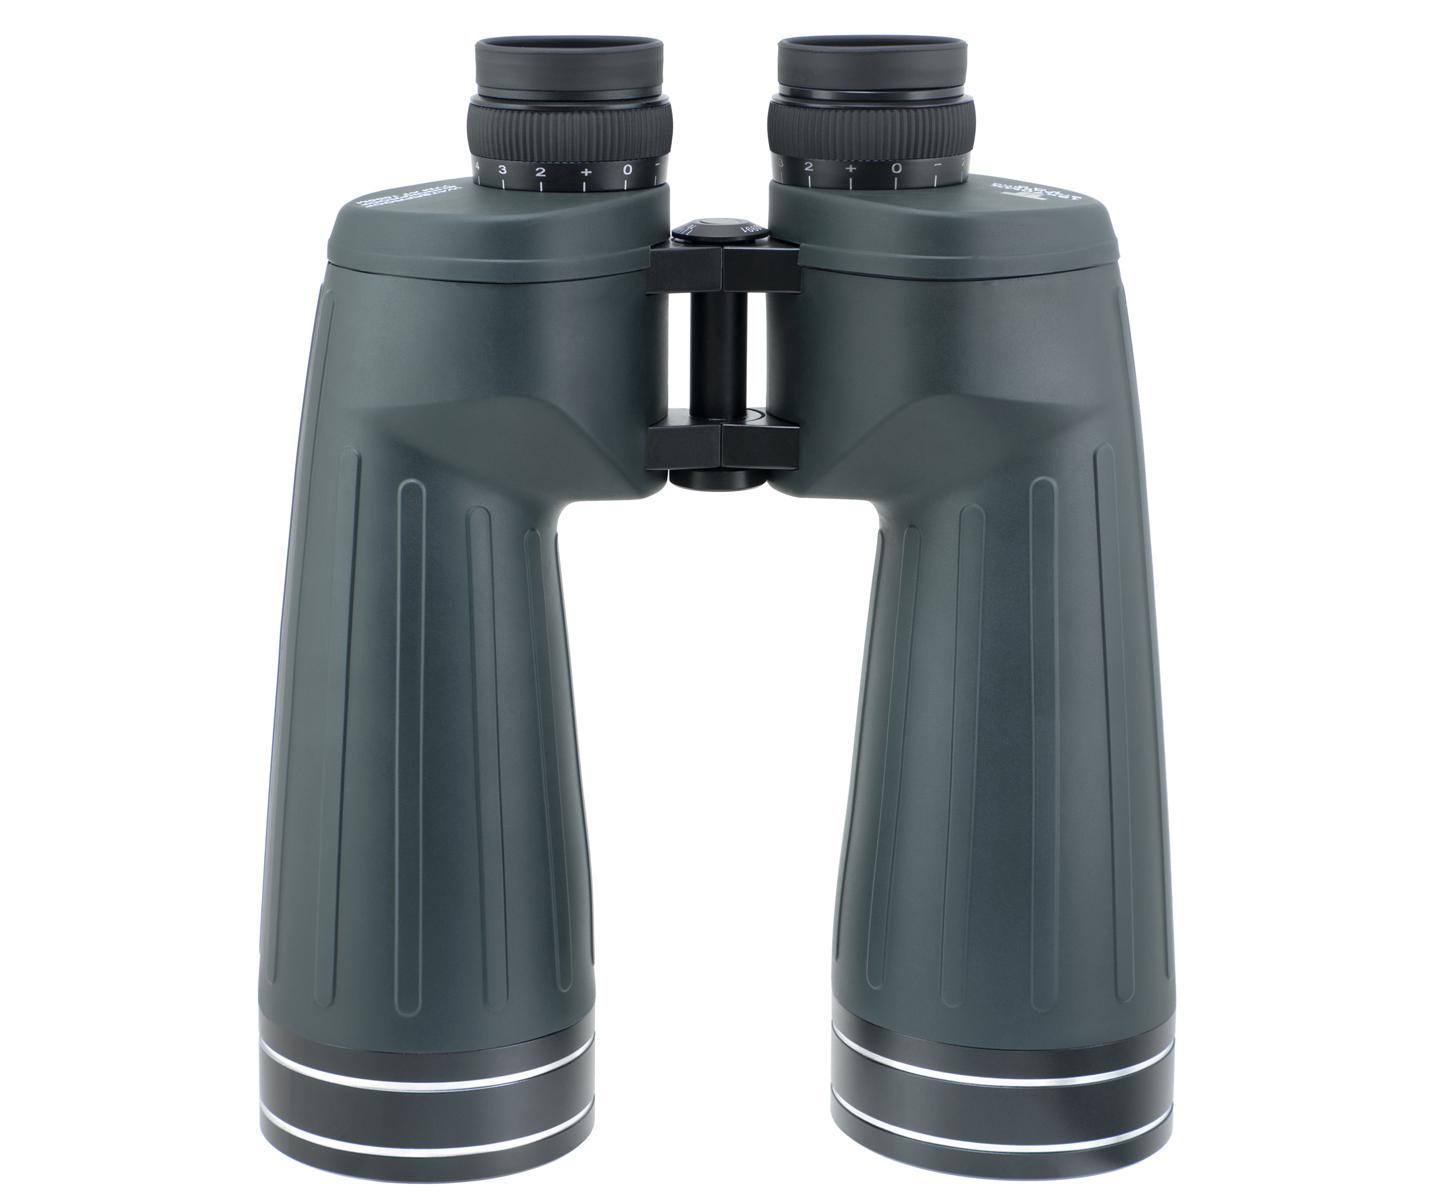  The 15x70MX outdoor binoculars from Teleskop-Service offer great observation through the two large lenses and it is weatherproof [EN] 